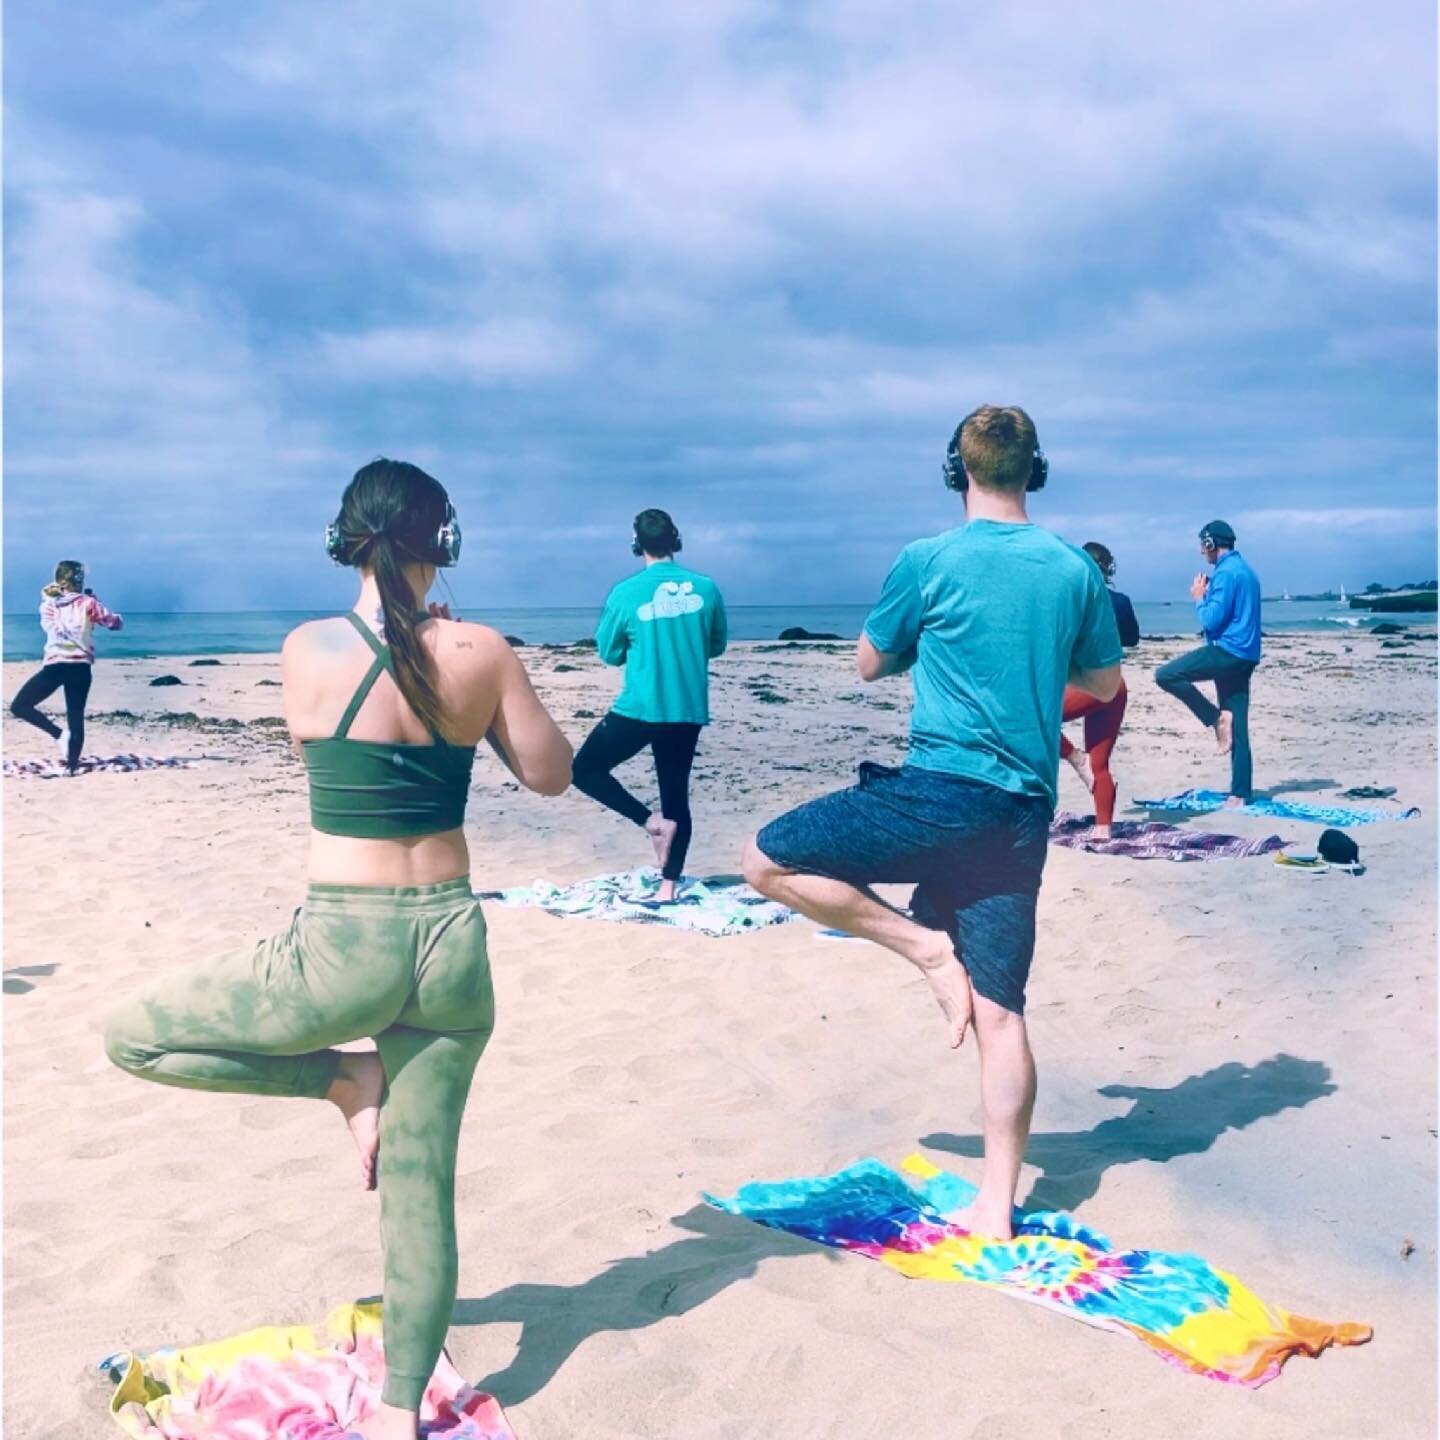 Have you experienced yoga outdoors? 

Just when we think it can&rsquo;t get better there&rsquo;s more ... each day a new beginning. 

Flowing with the drifting clouds and feeling the breath of the ocean below. 
We too can make big shifts, of percepti